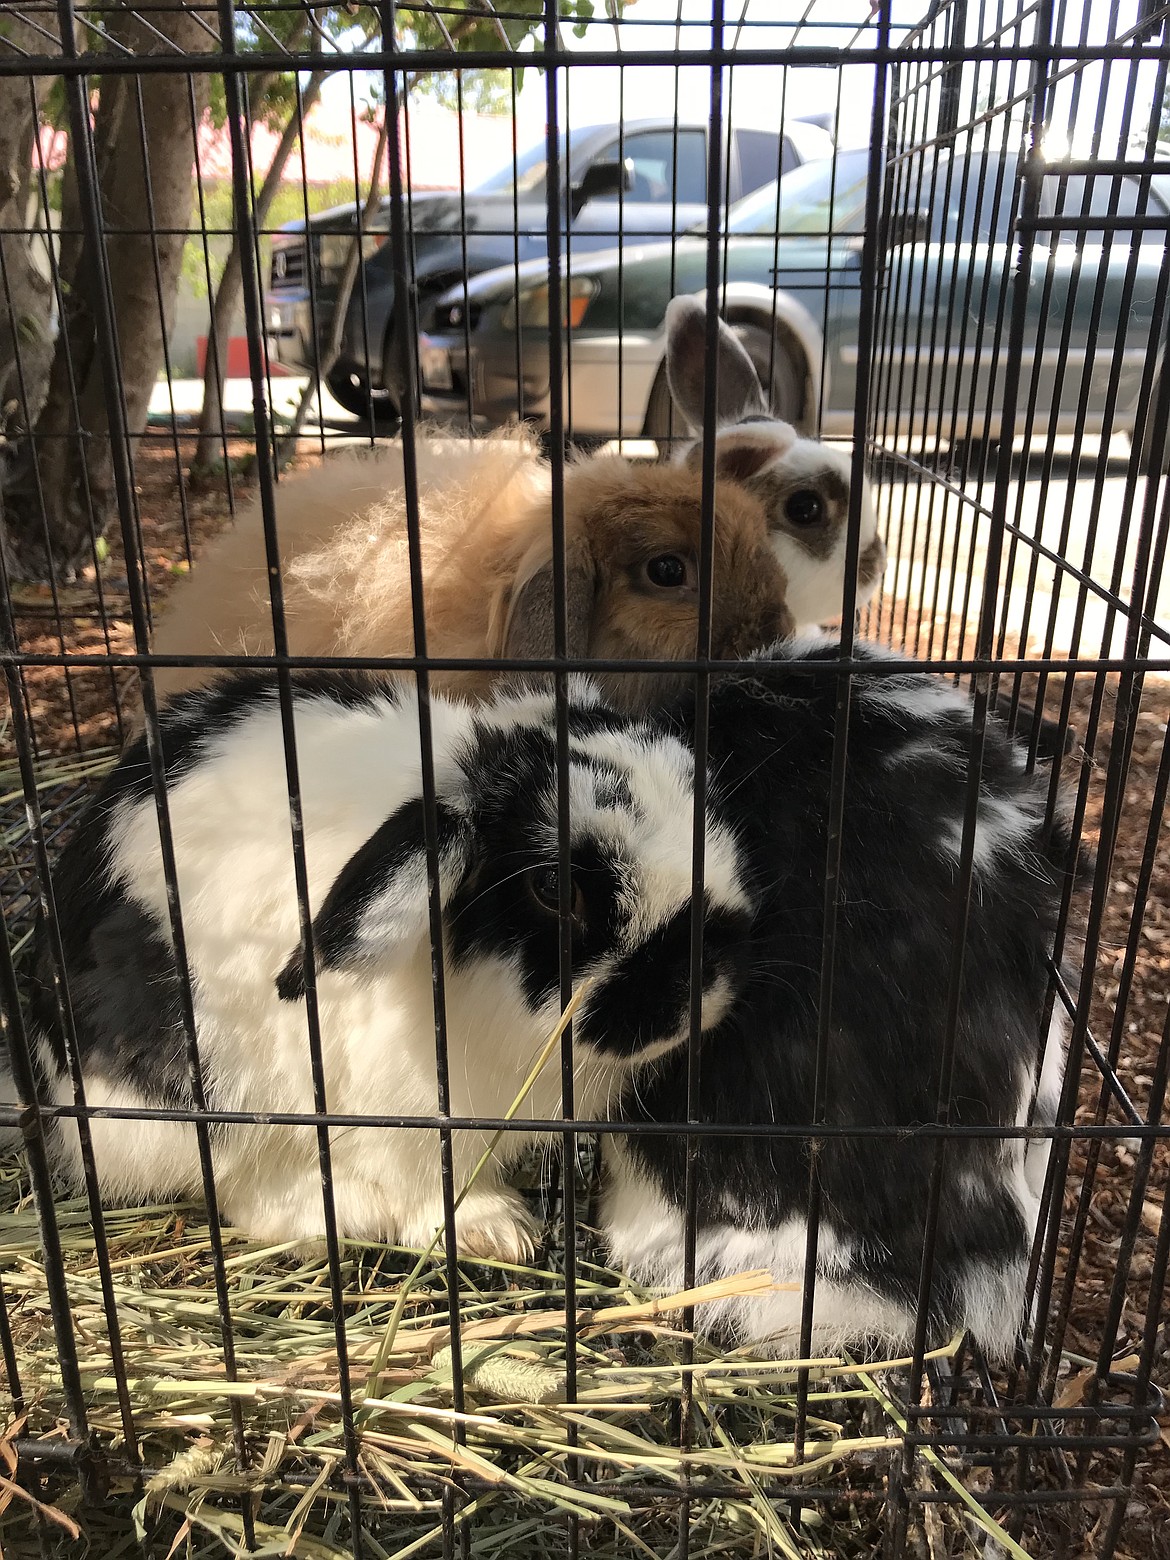 This wire kennel full of rabbits was left in the Kootenai Humane Society parking lot during temperatures of more than 90 degrees.